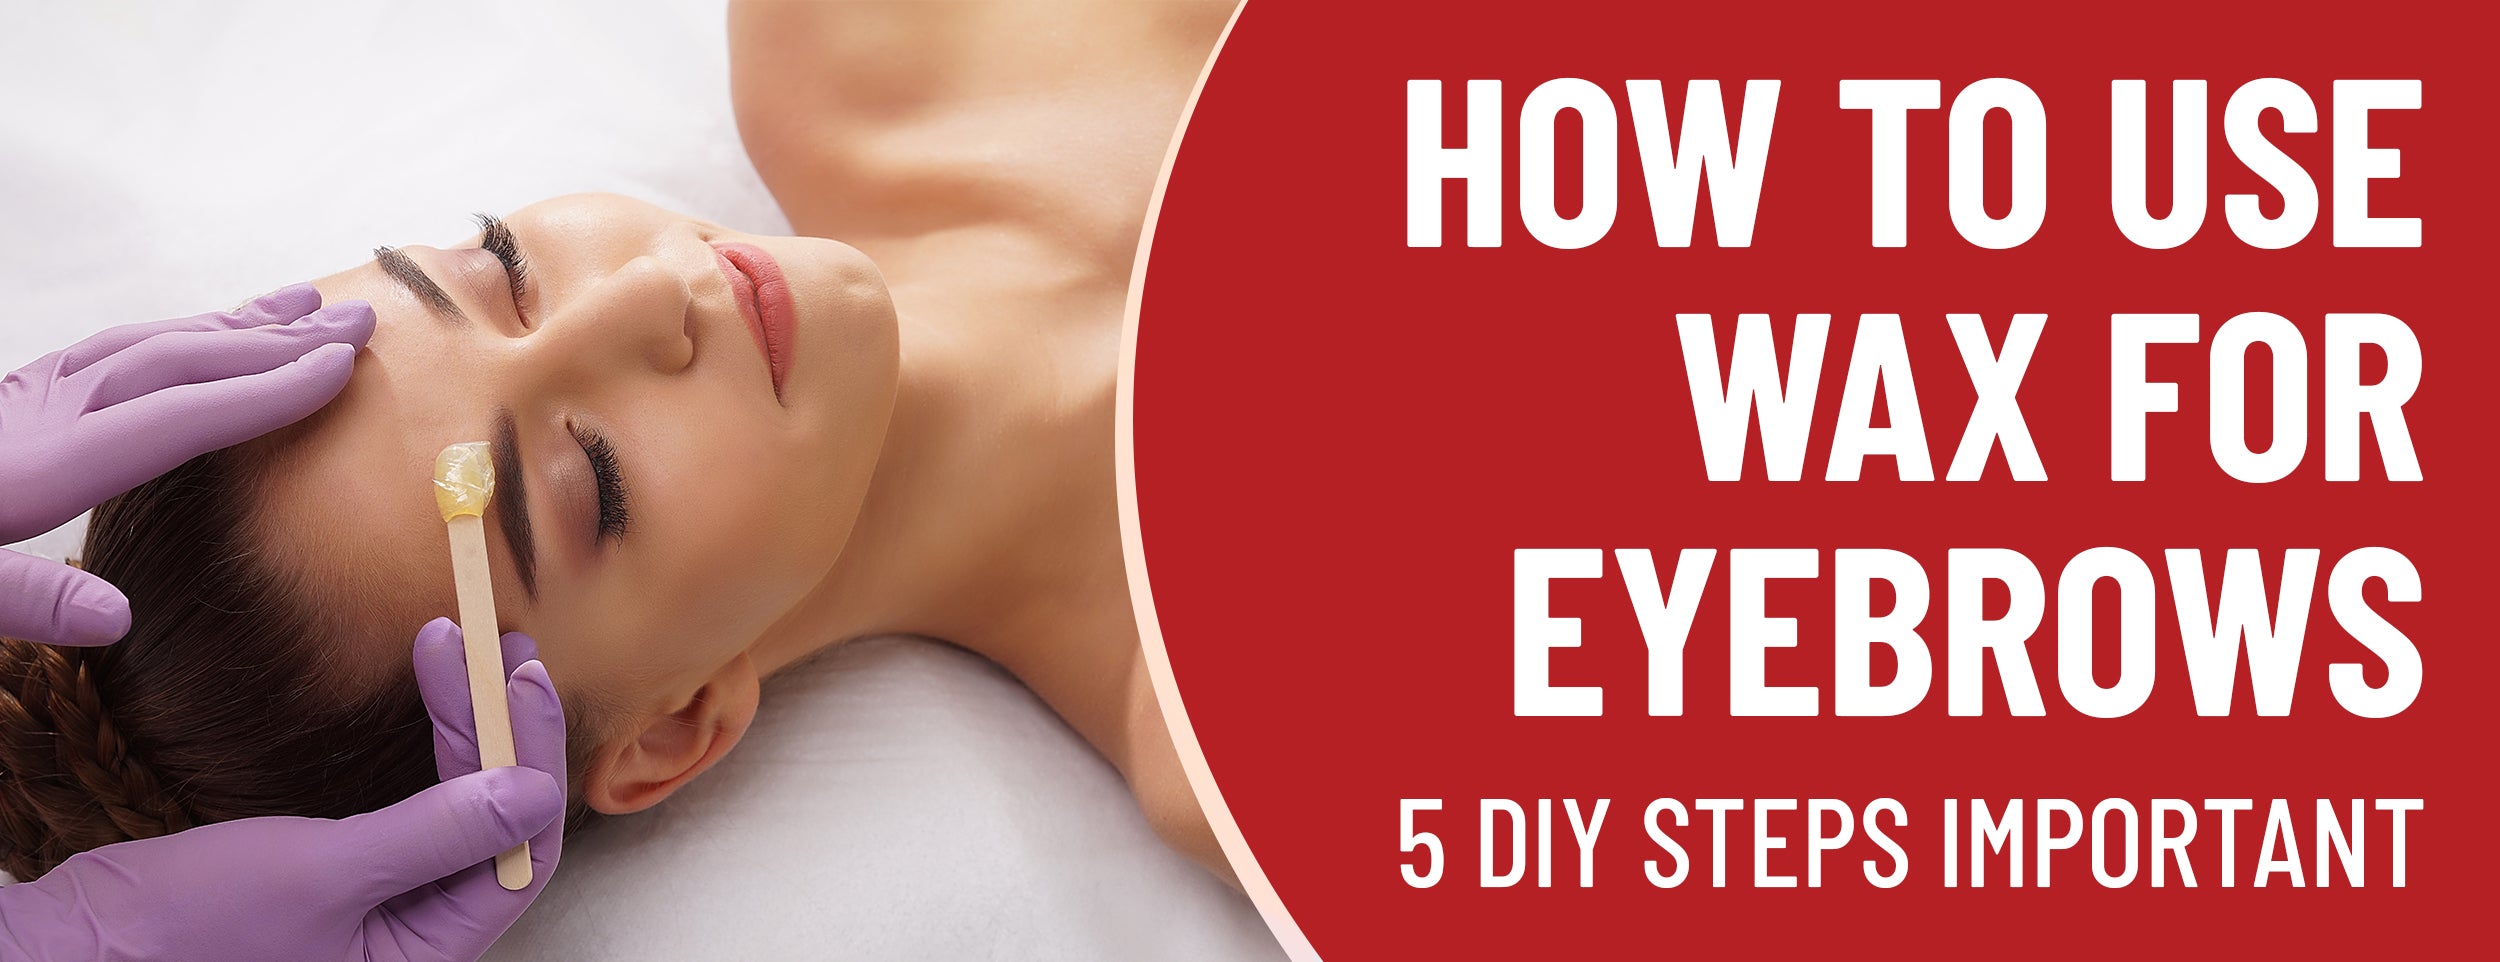 Essential Steps for Waxing Eyebrows